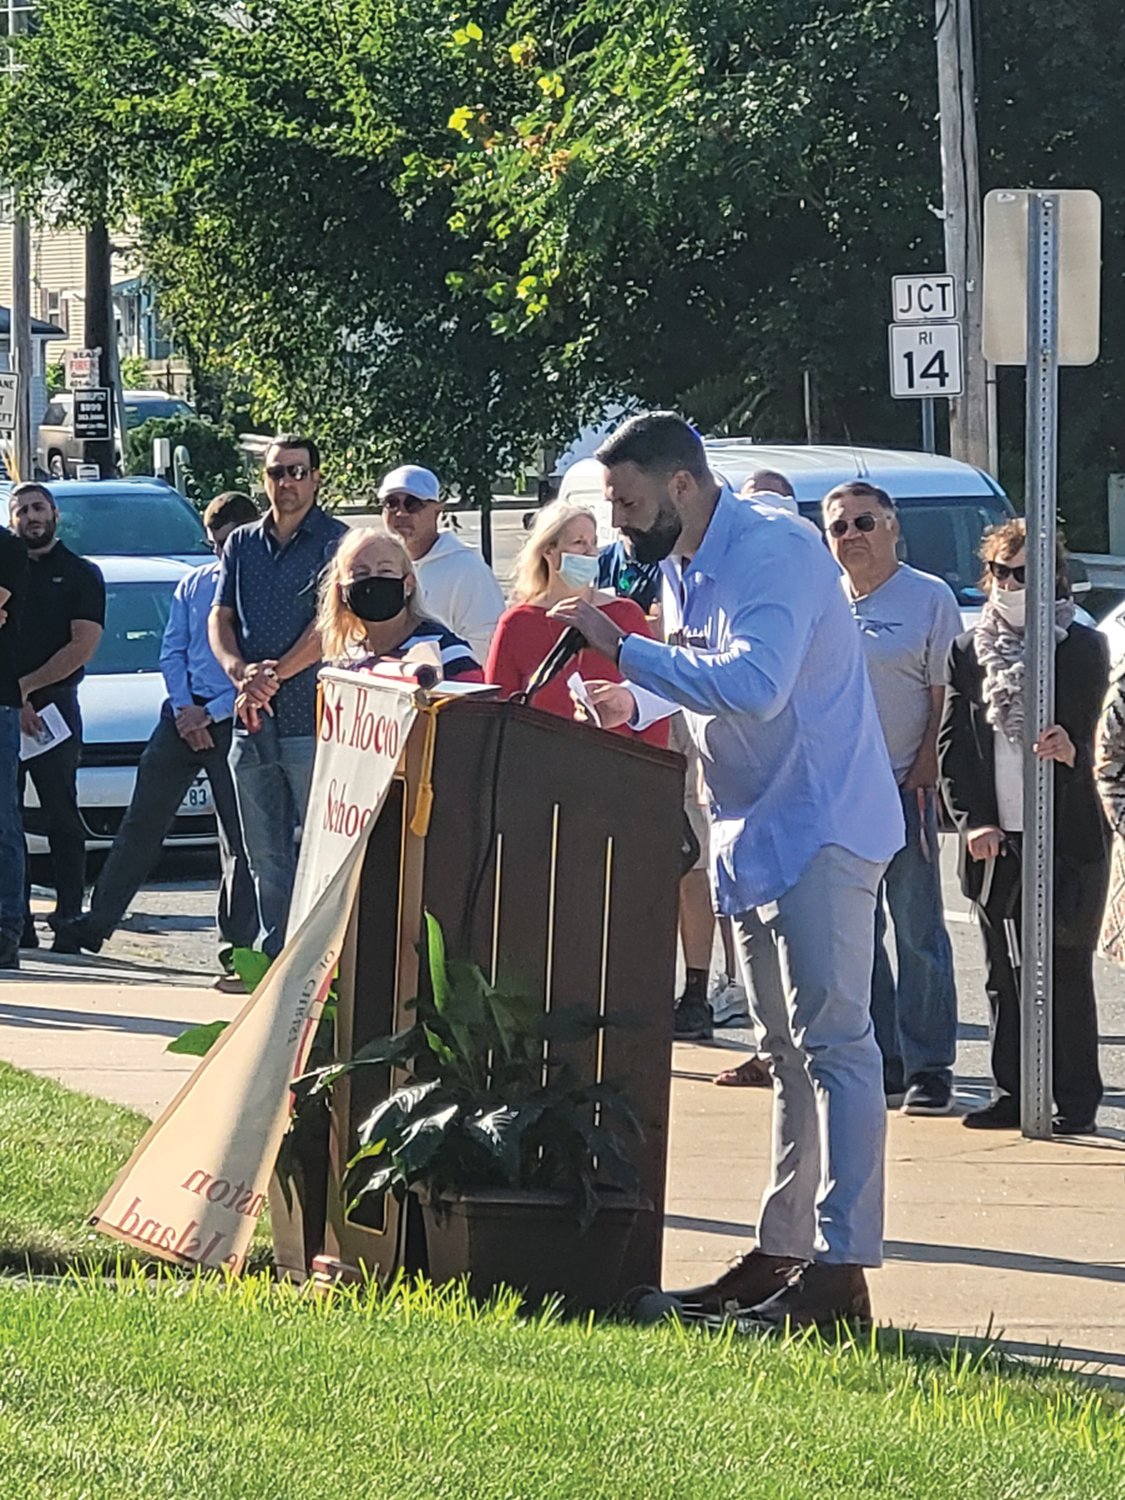 NEVER FORGET: Matthew Newell lost his mother Renee on Sept. 11, 2001. He thanked the crowd gathered outside St. Rocco School last Friday, for gathering to remember her life, and the nearly 3,000 others who died that day.